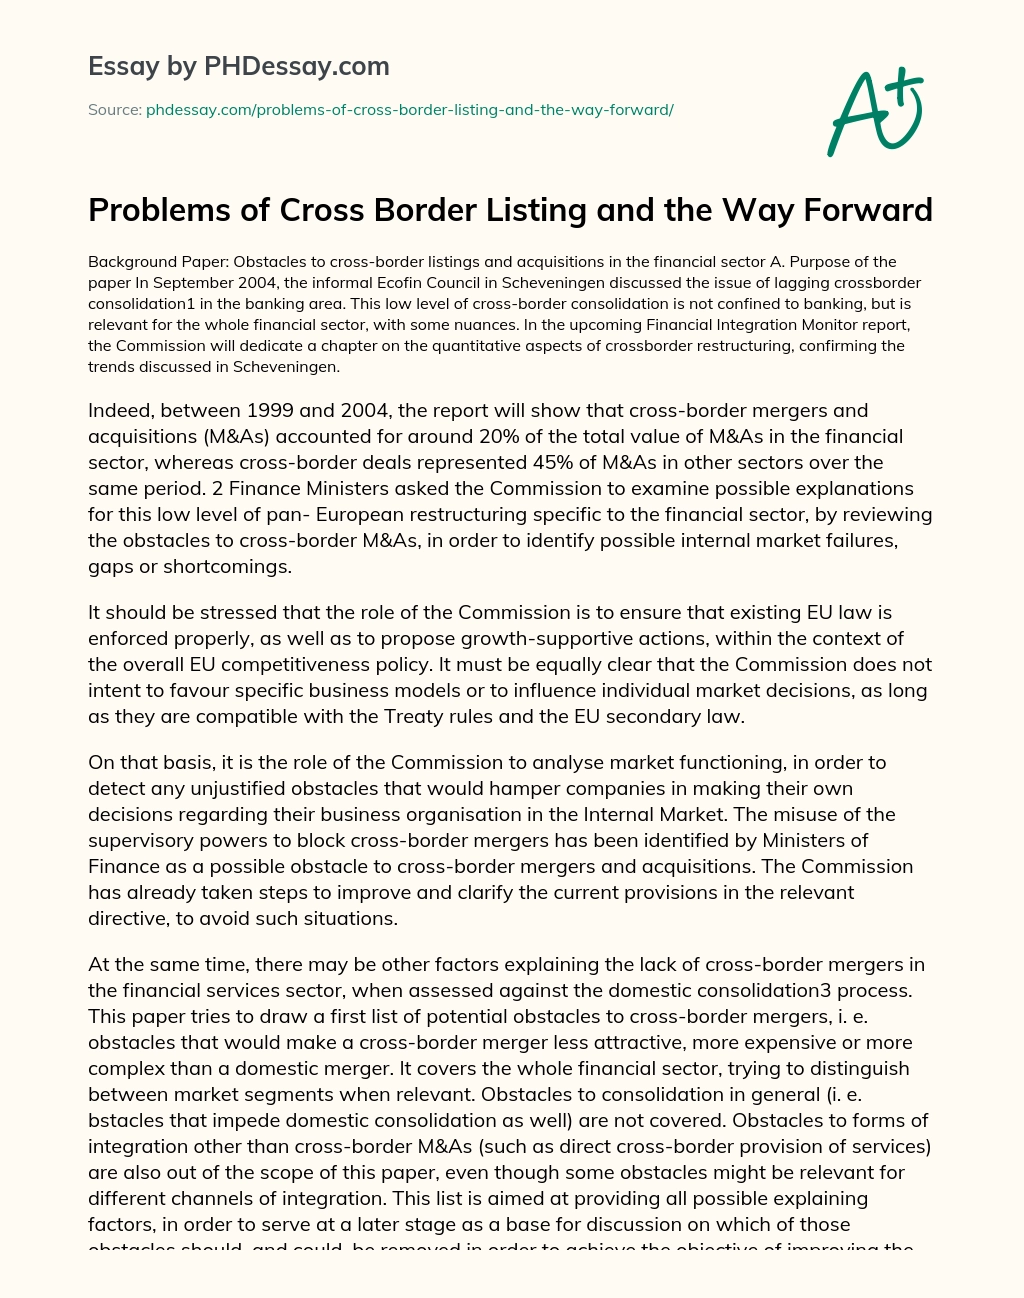 Problems of Cross Border Listing and the Way Forward essay